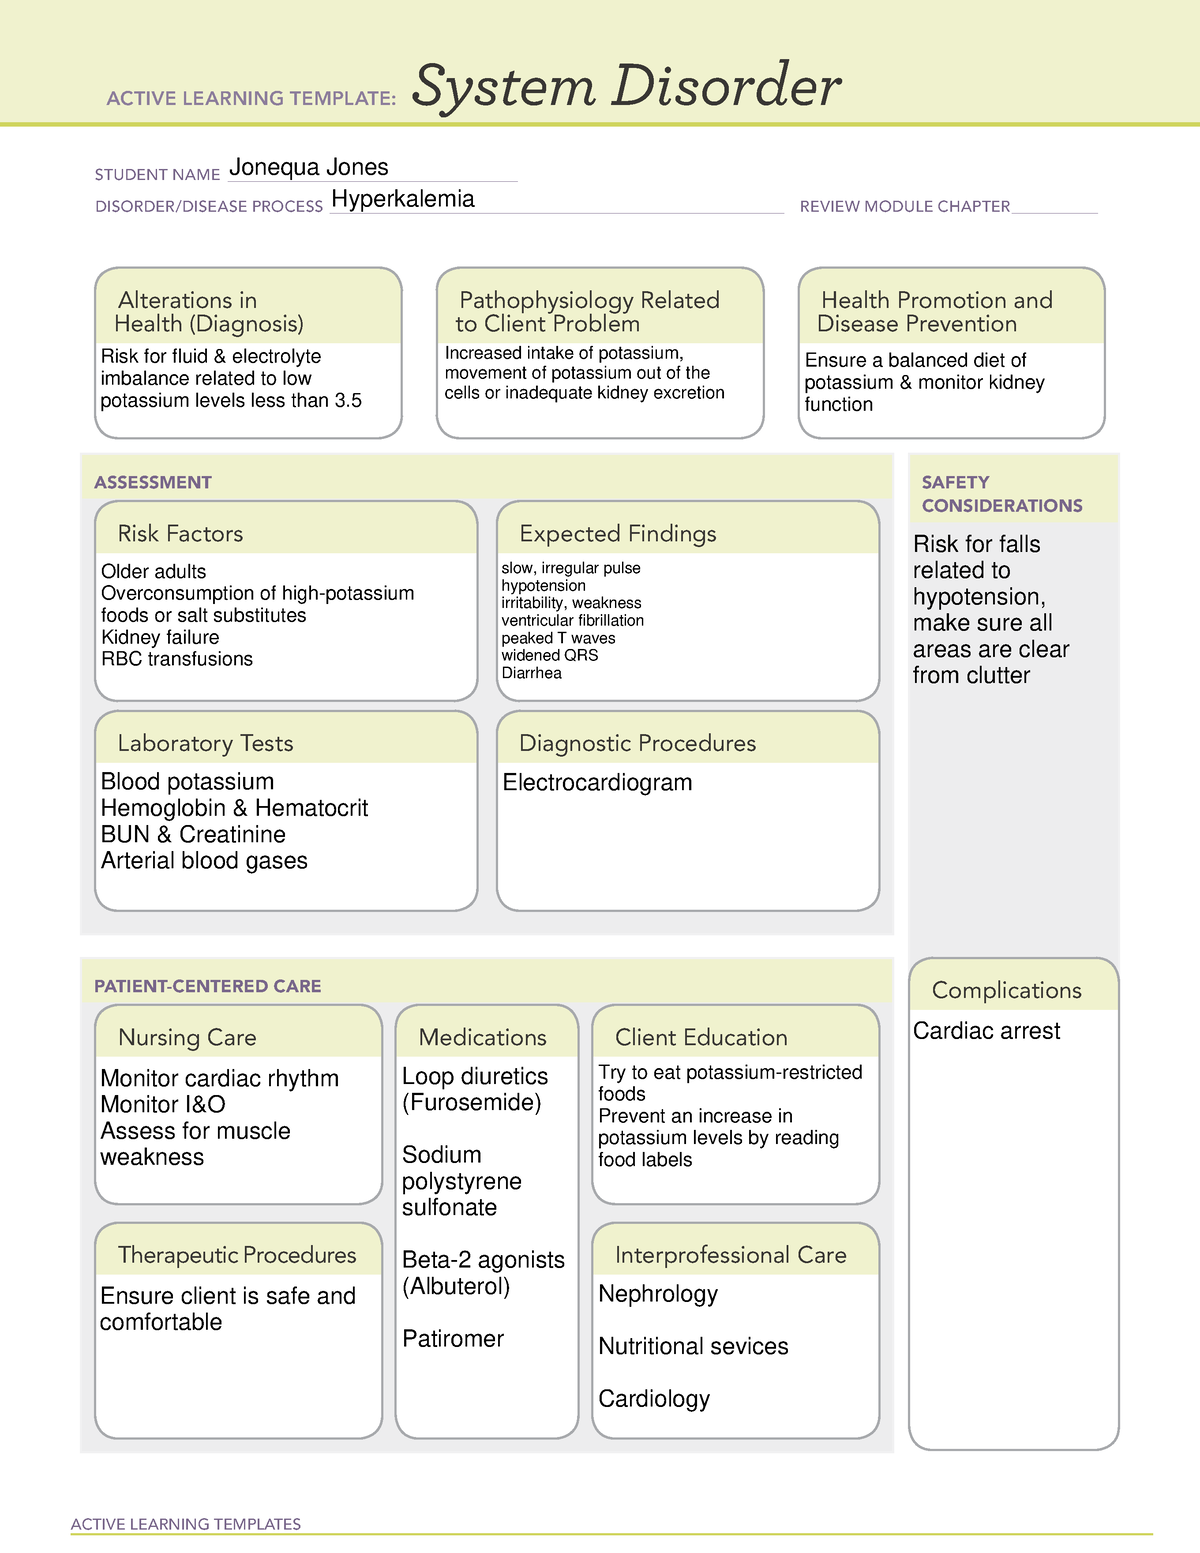 Hyperkalemia system disorder form ACTIVE LEARNING TEMPLATES System